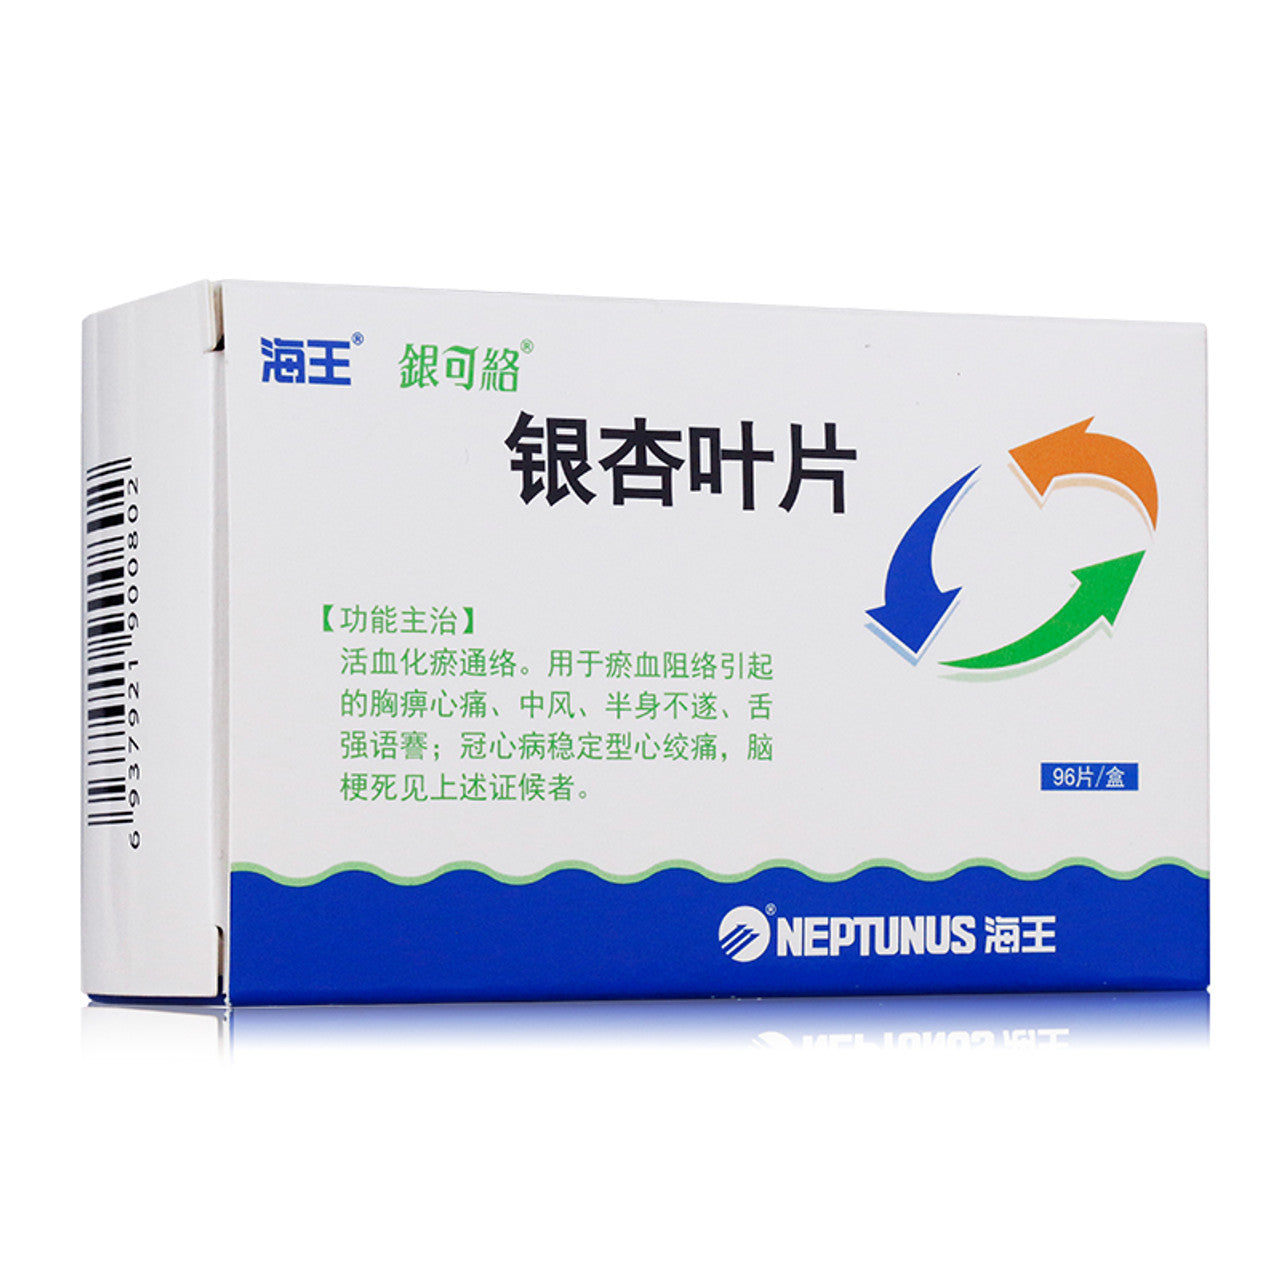 (96 Tablets*3 boxes/lot). Yinxingye Pian or Ginkgo Leaf Tablets  for chest numbness, heartache, stroke, hemiplegia, and tongue stubbornness caused by blood stasis; stable angina pectoris of coronary heart disease, and cerebral infarction